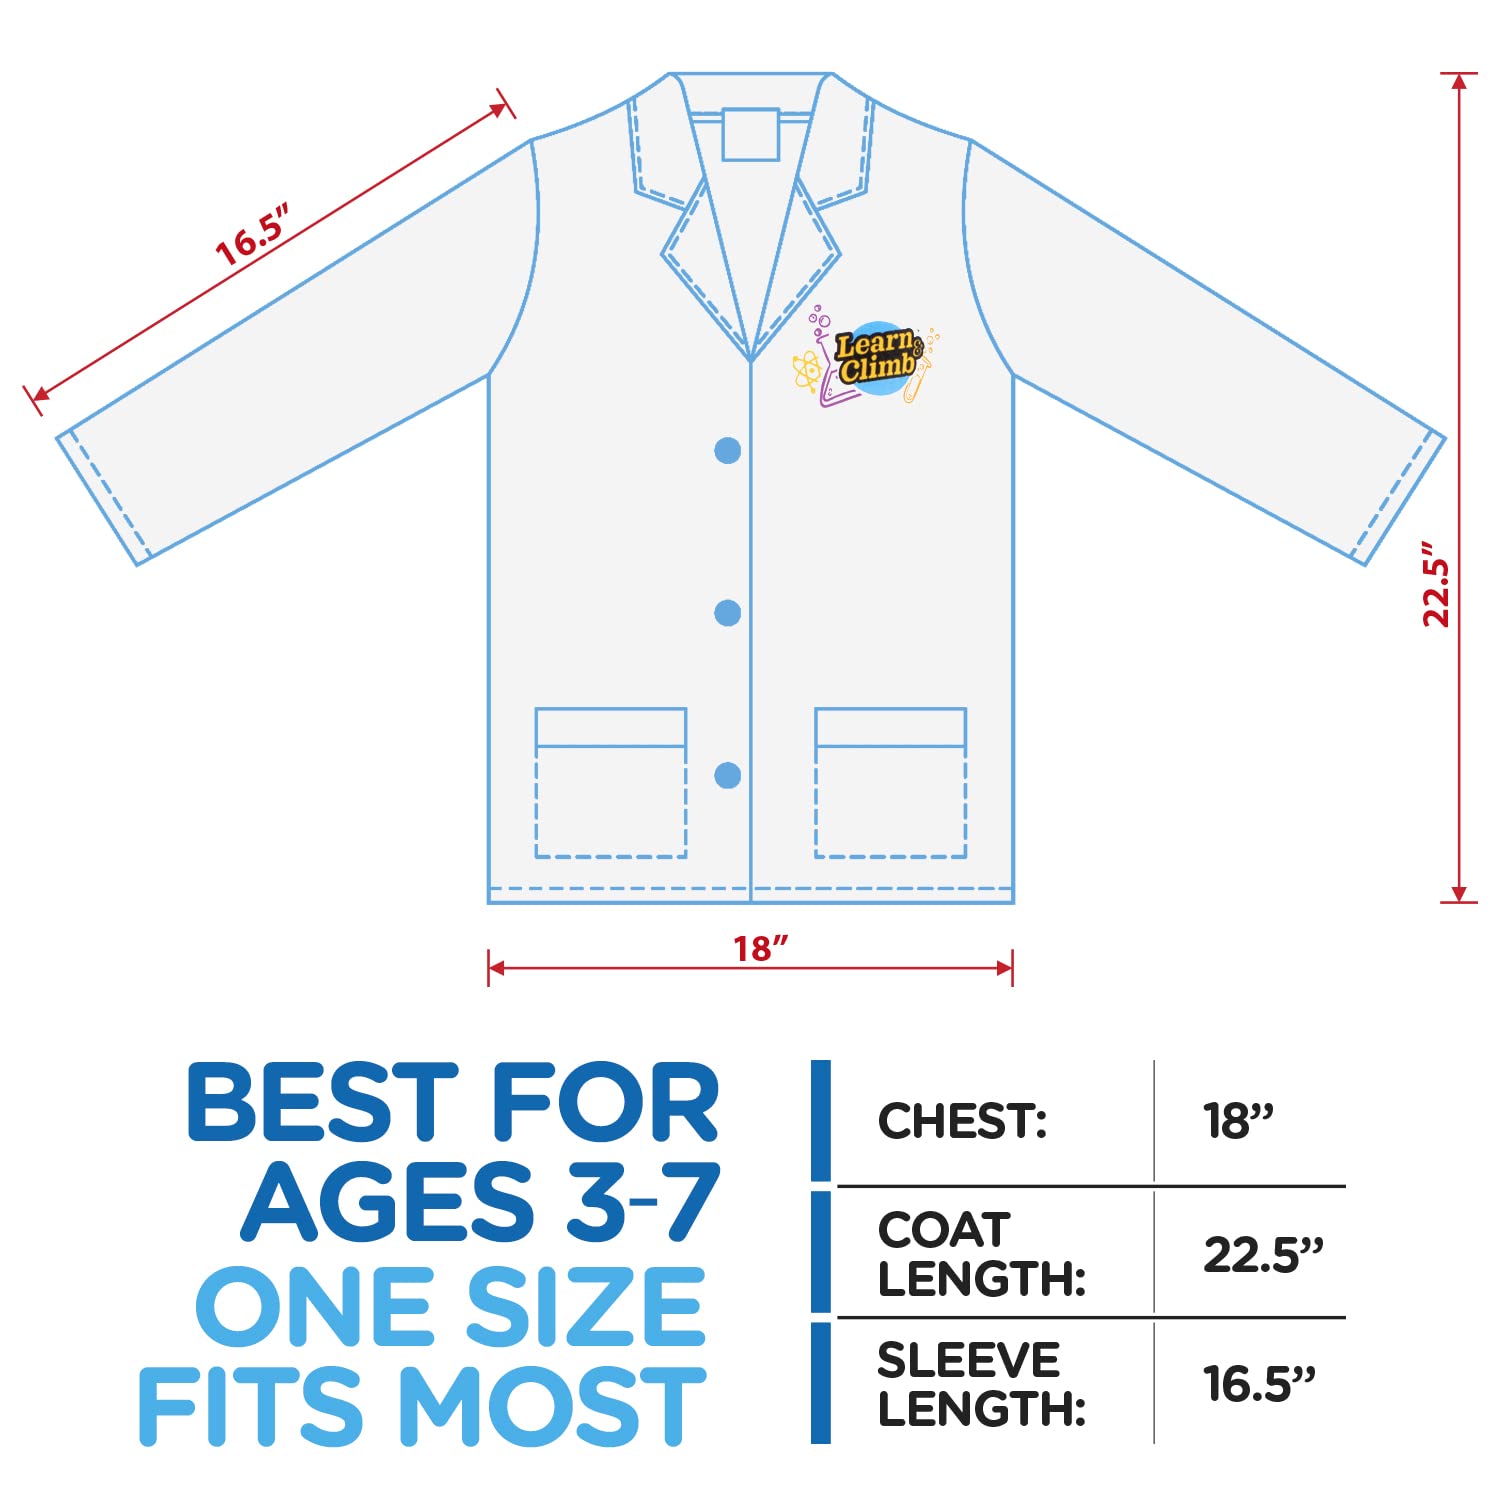 Learn & Climb Scientist Lab Coat for Kids Ages 3-7. Three Piece Set Children's Scientist Costume with Goggles & ID Card